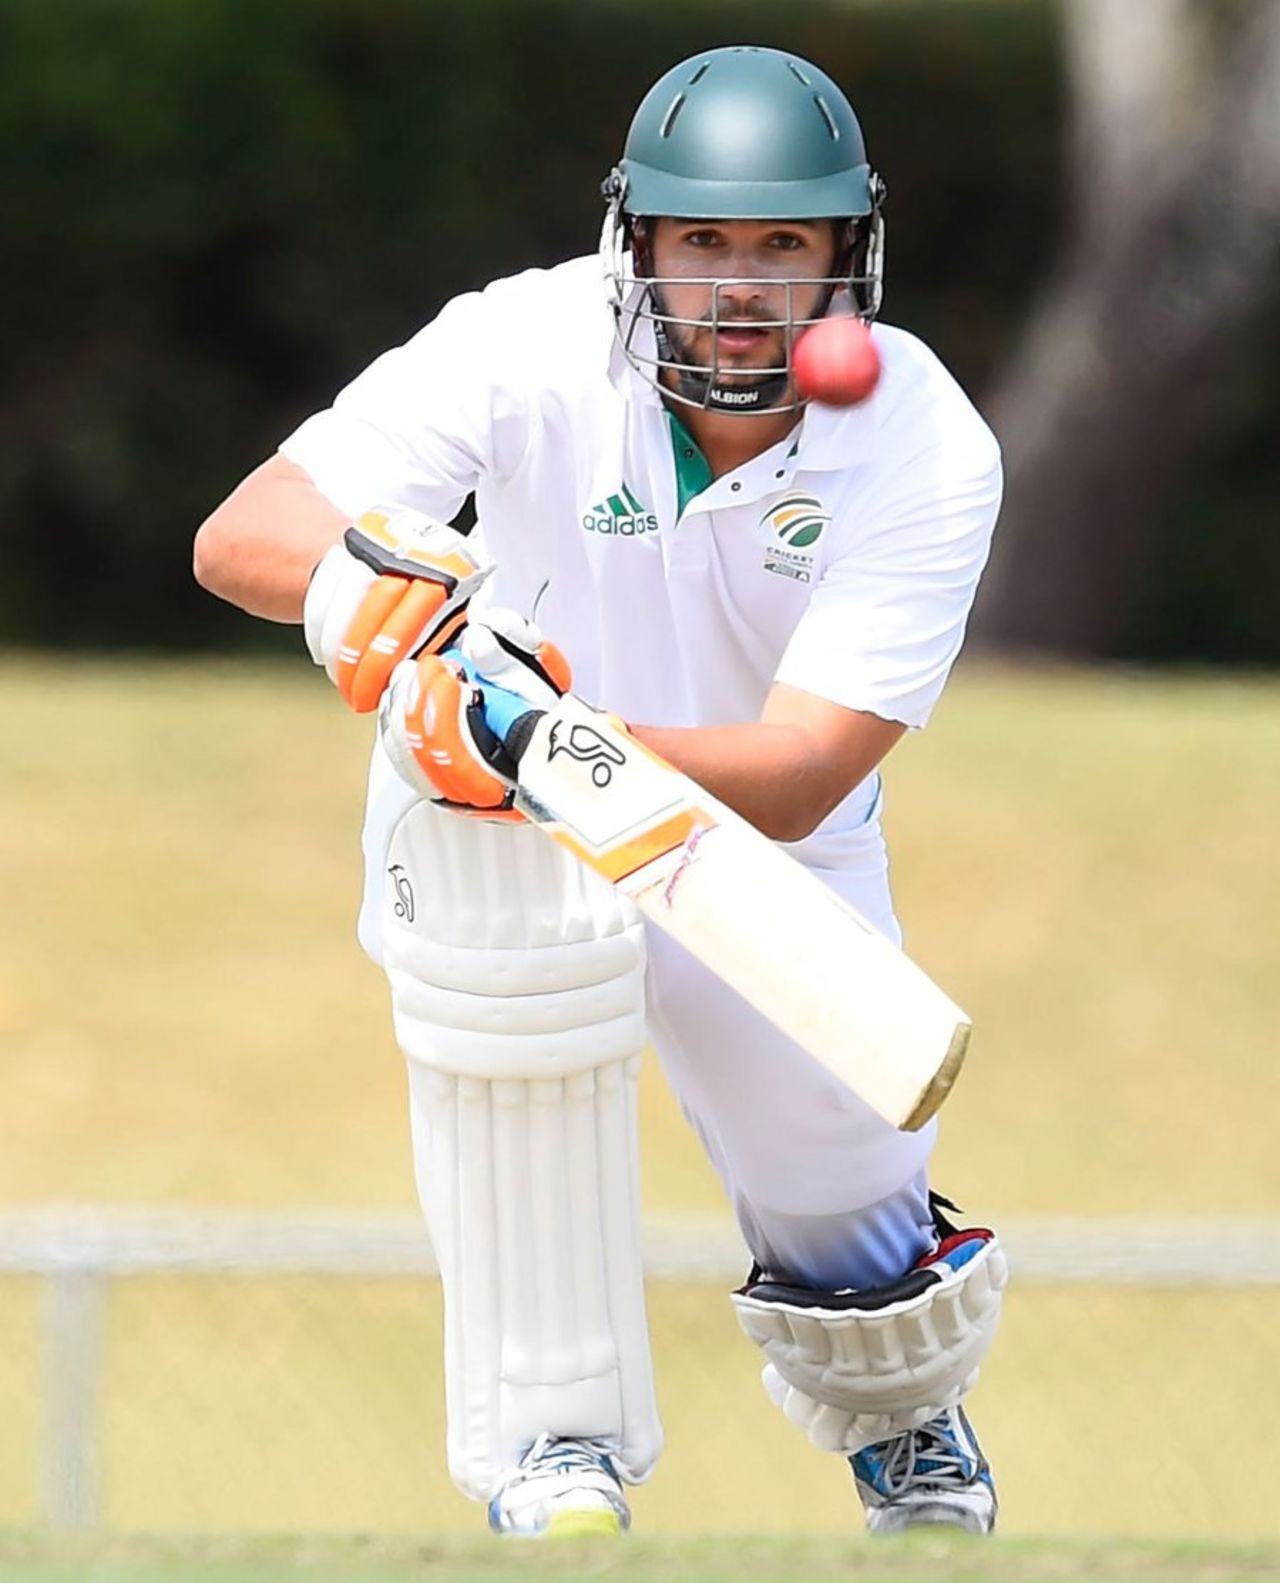 Rilee Rossouw watches the ball closely, Australia A v South Africa A, 1st unofficial Test, Townsville, August 8, 2014